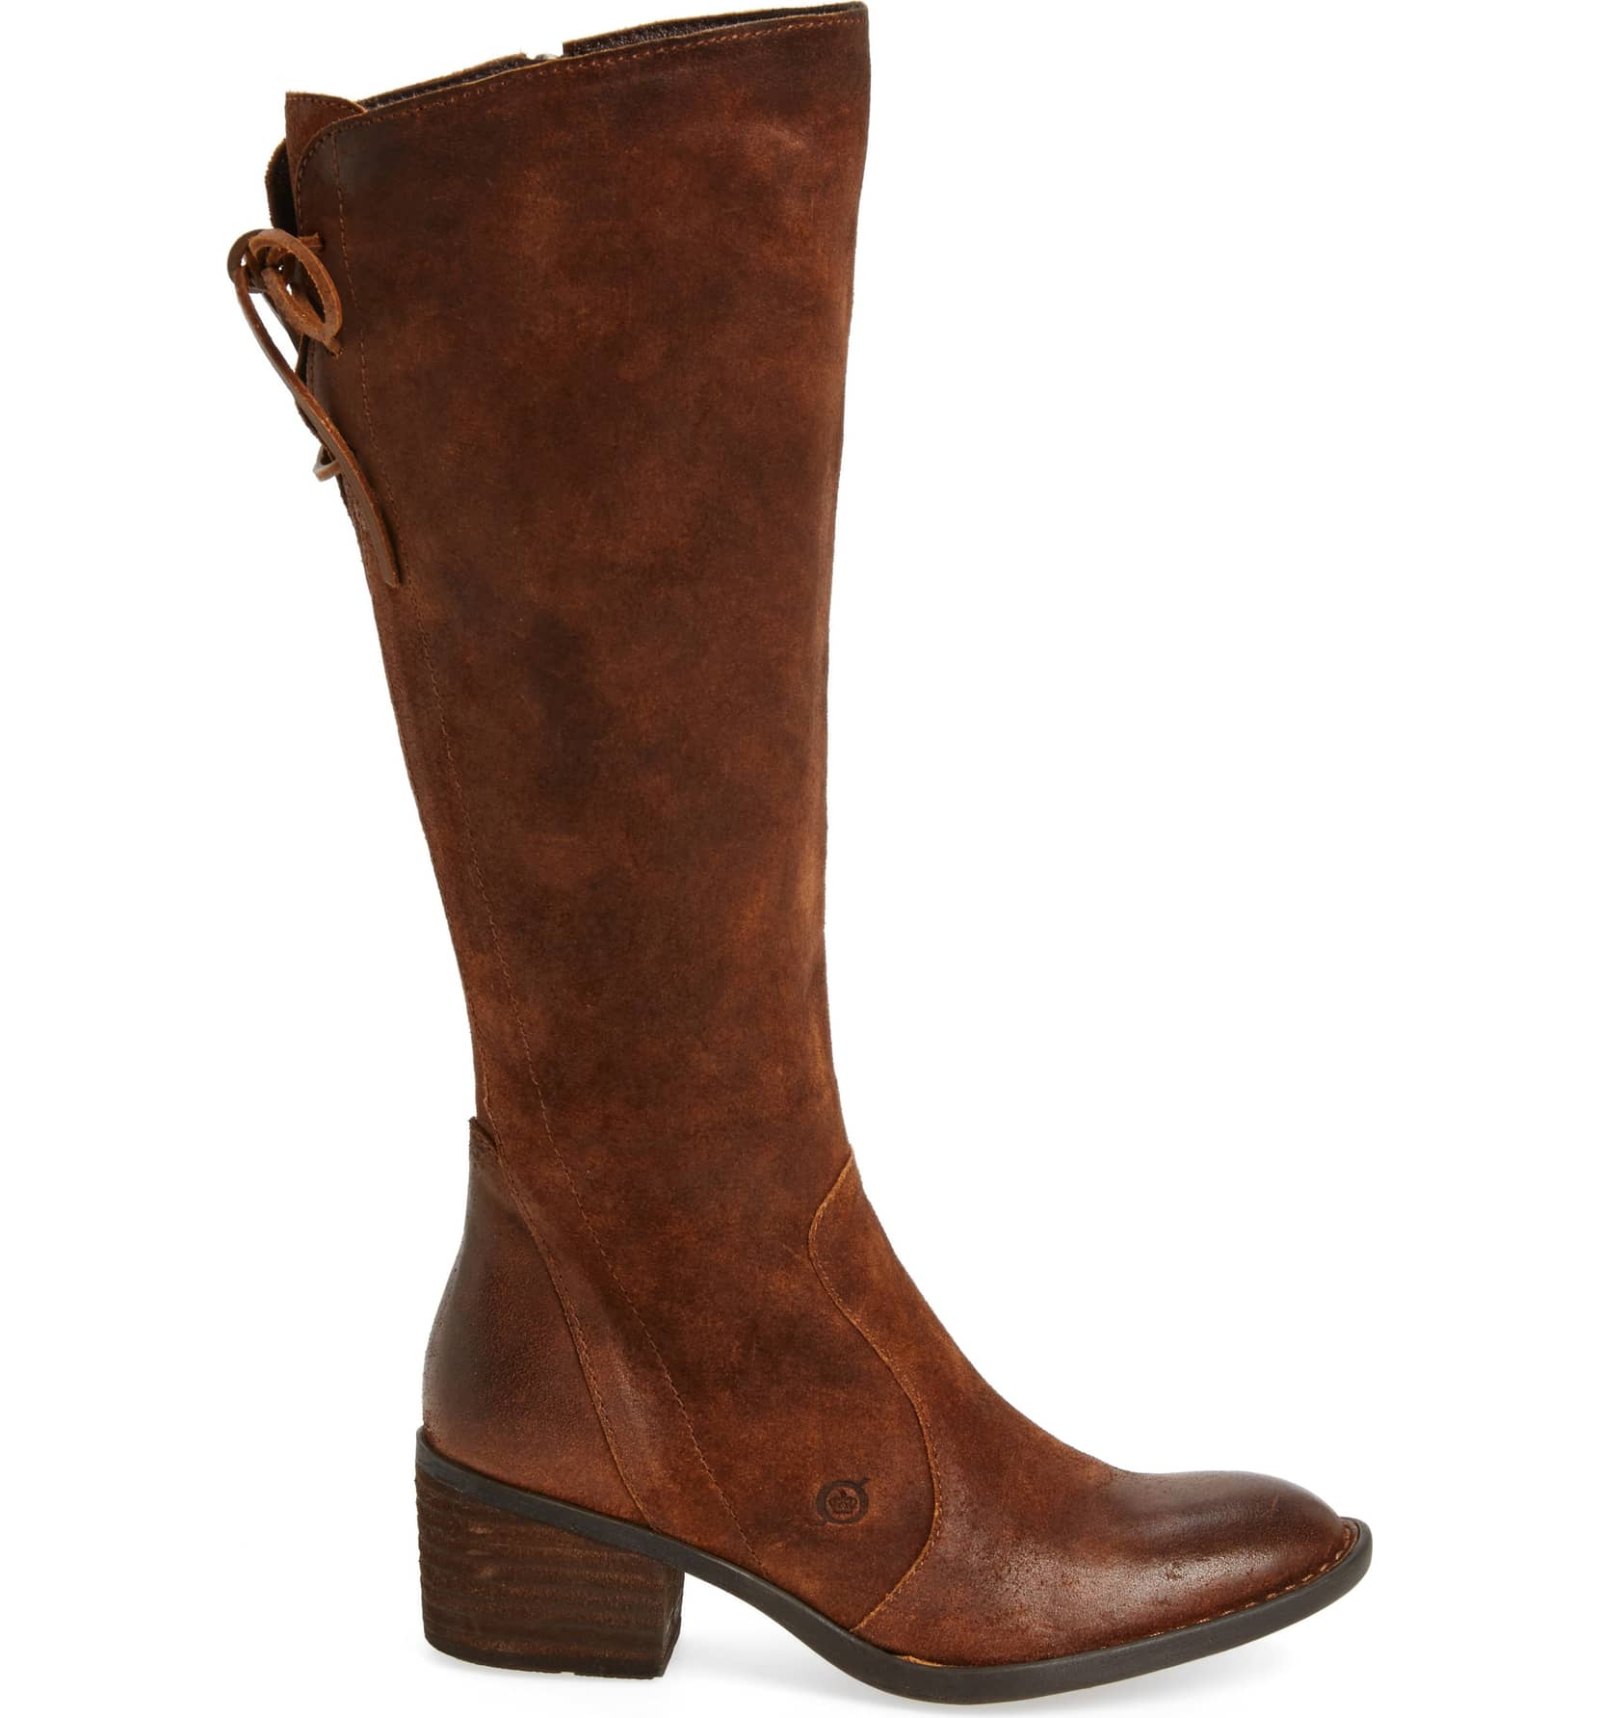 Shop Trendy Distressed Leather Boots on Sale at Nordstrom